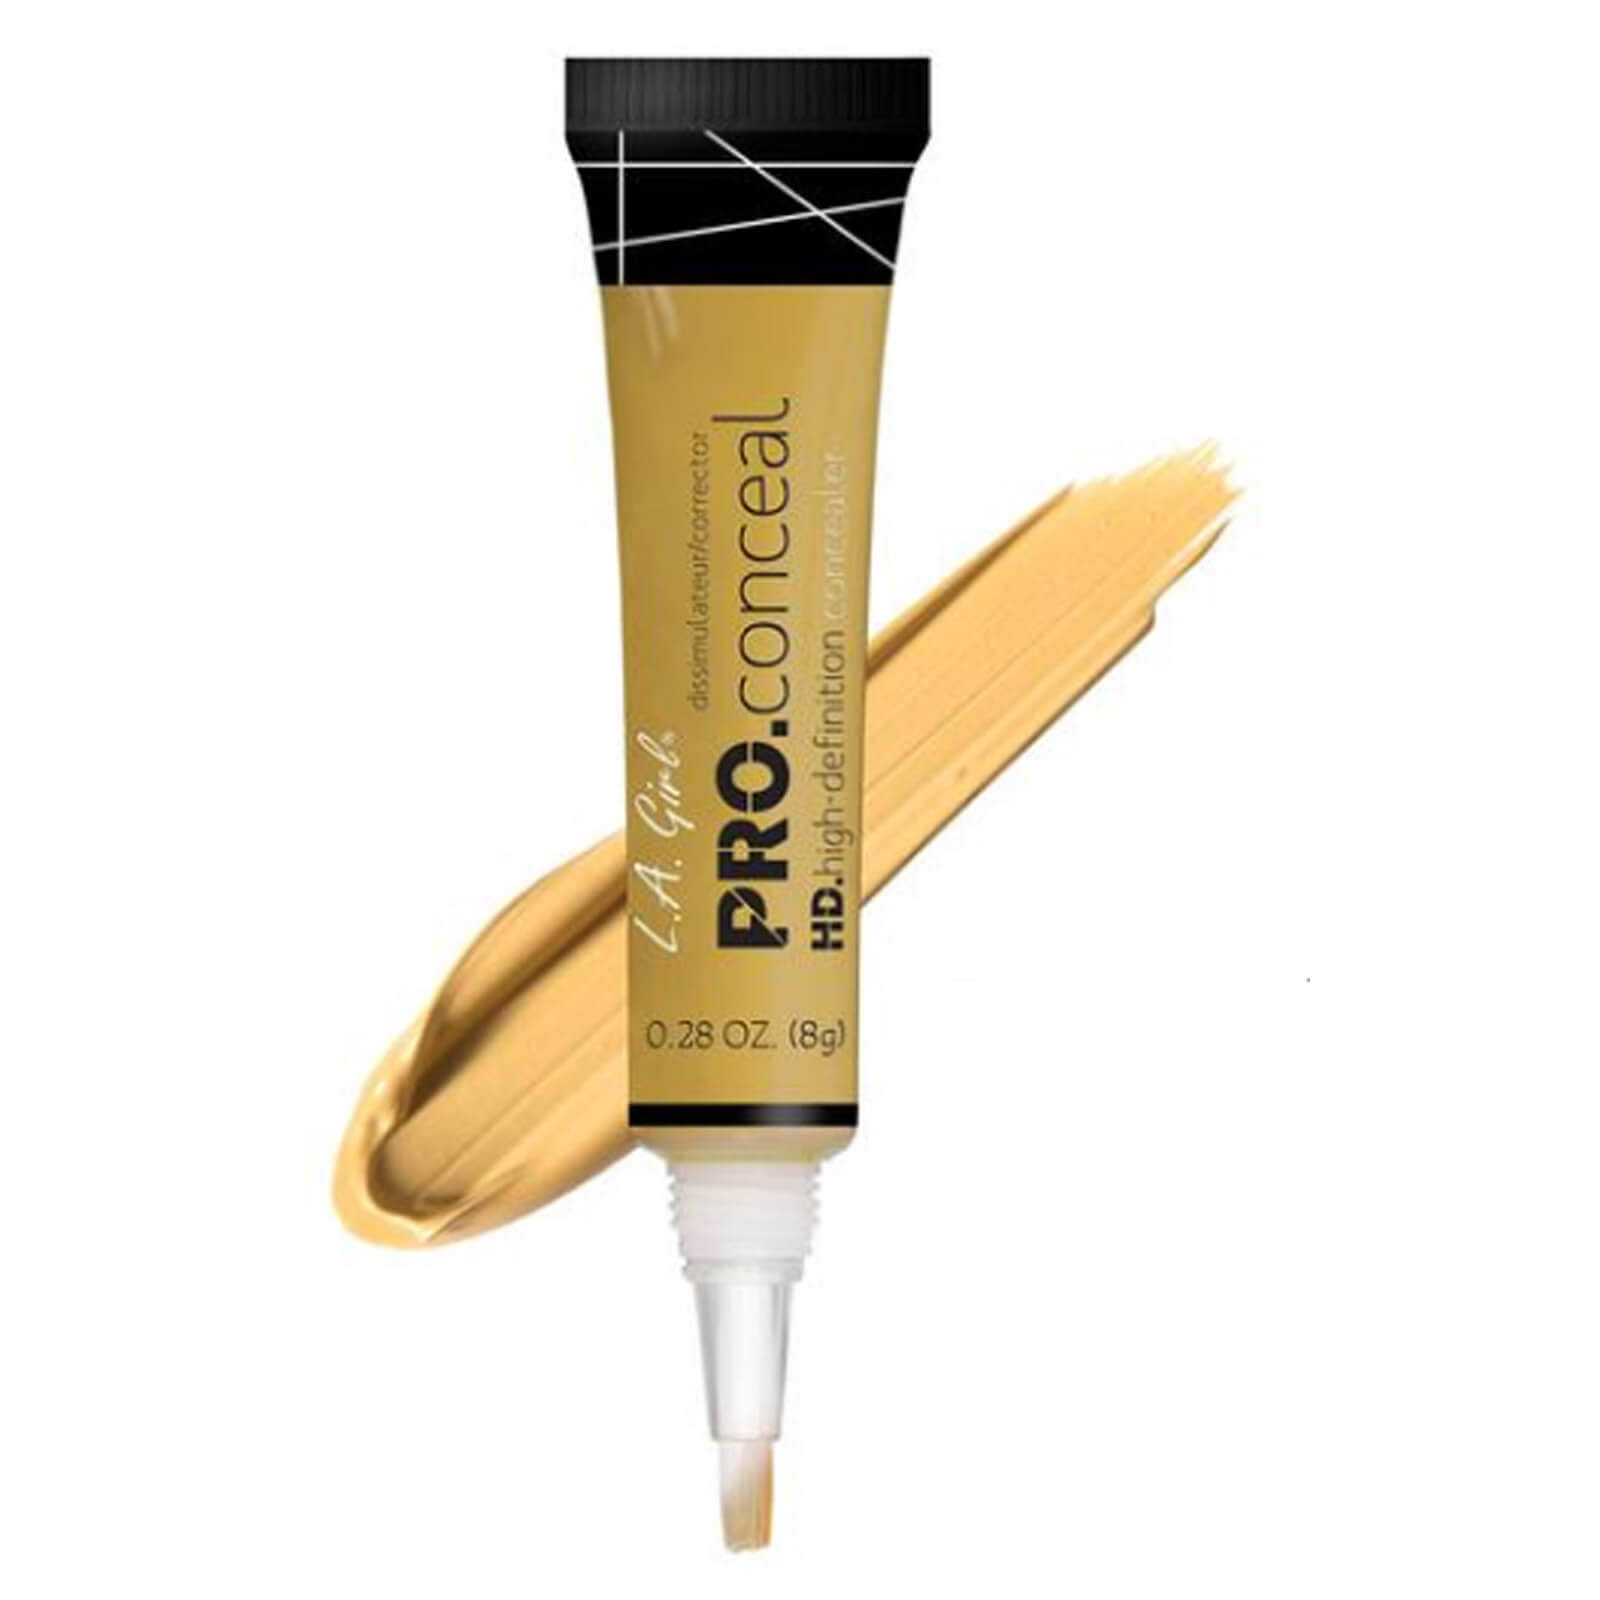 L.A. Girl Pro Conceal HD Concealer - GC991 Yellow Corrector, 0.28oz